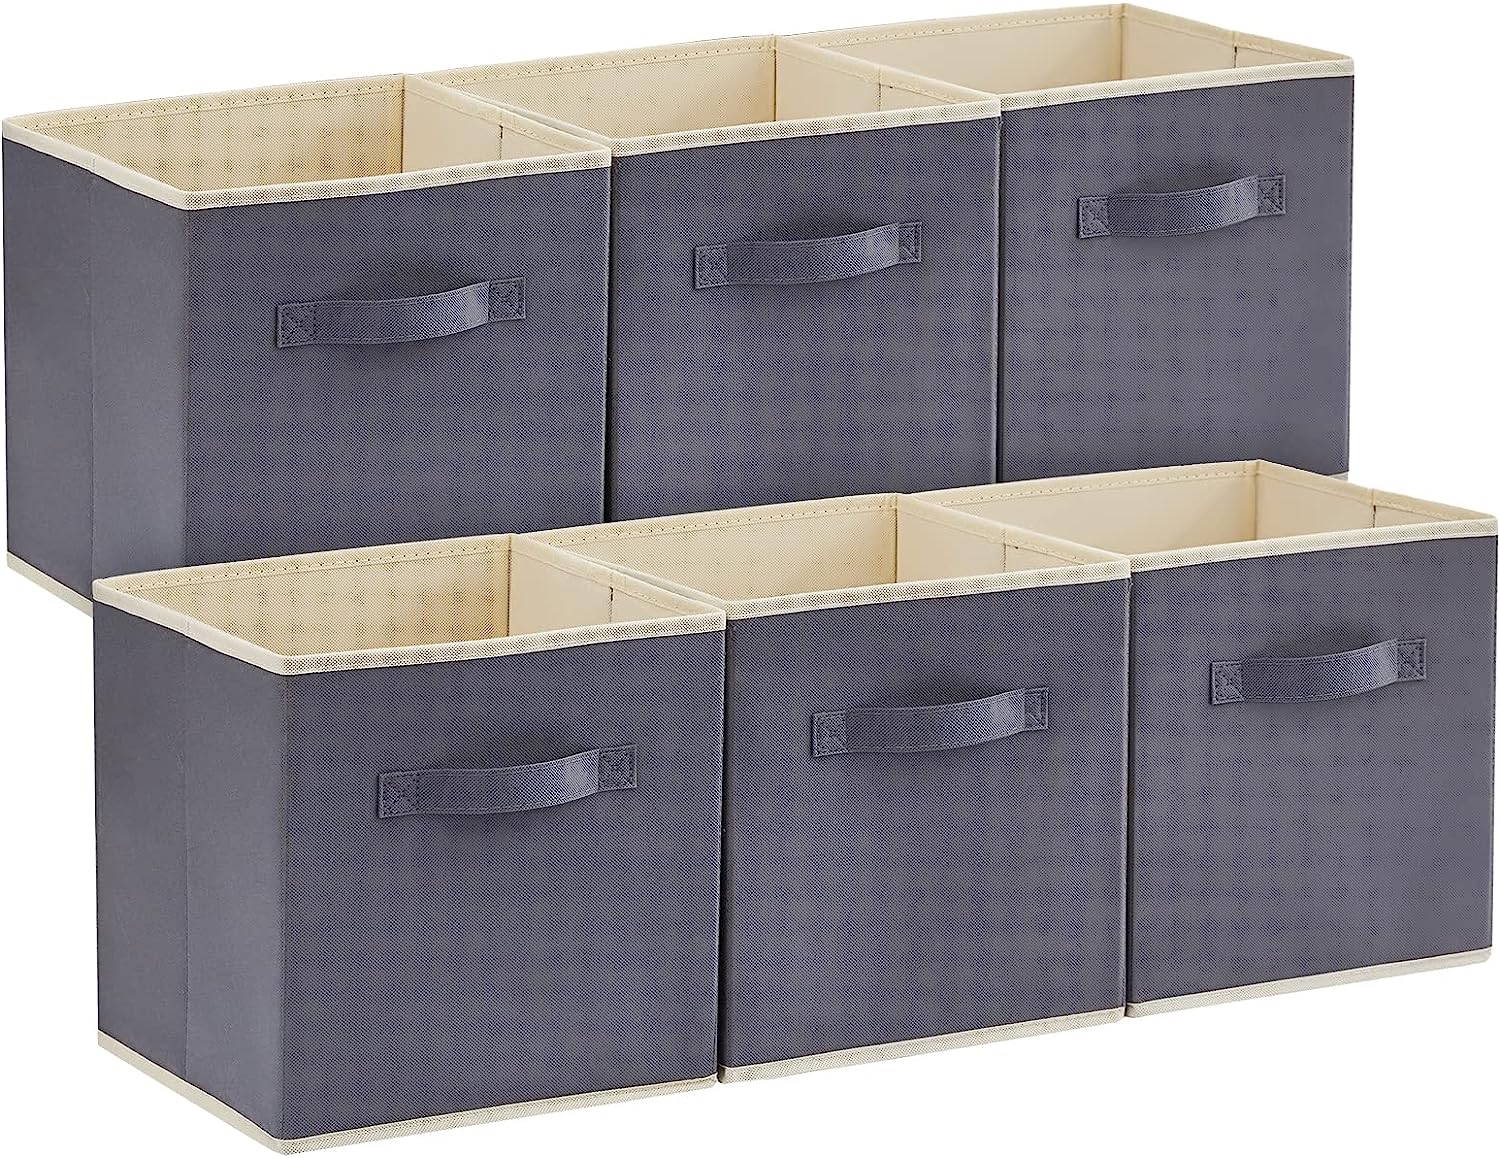  Lifewit Collapsible Storage Cubes 11 Inch Foldable Fabric Bins Multi-color Organizers Decorative Organizing Baskets for Shelves for Closet, Utility Room, Storage Room Set of 6 Grey 